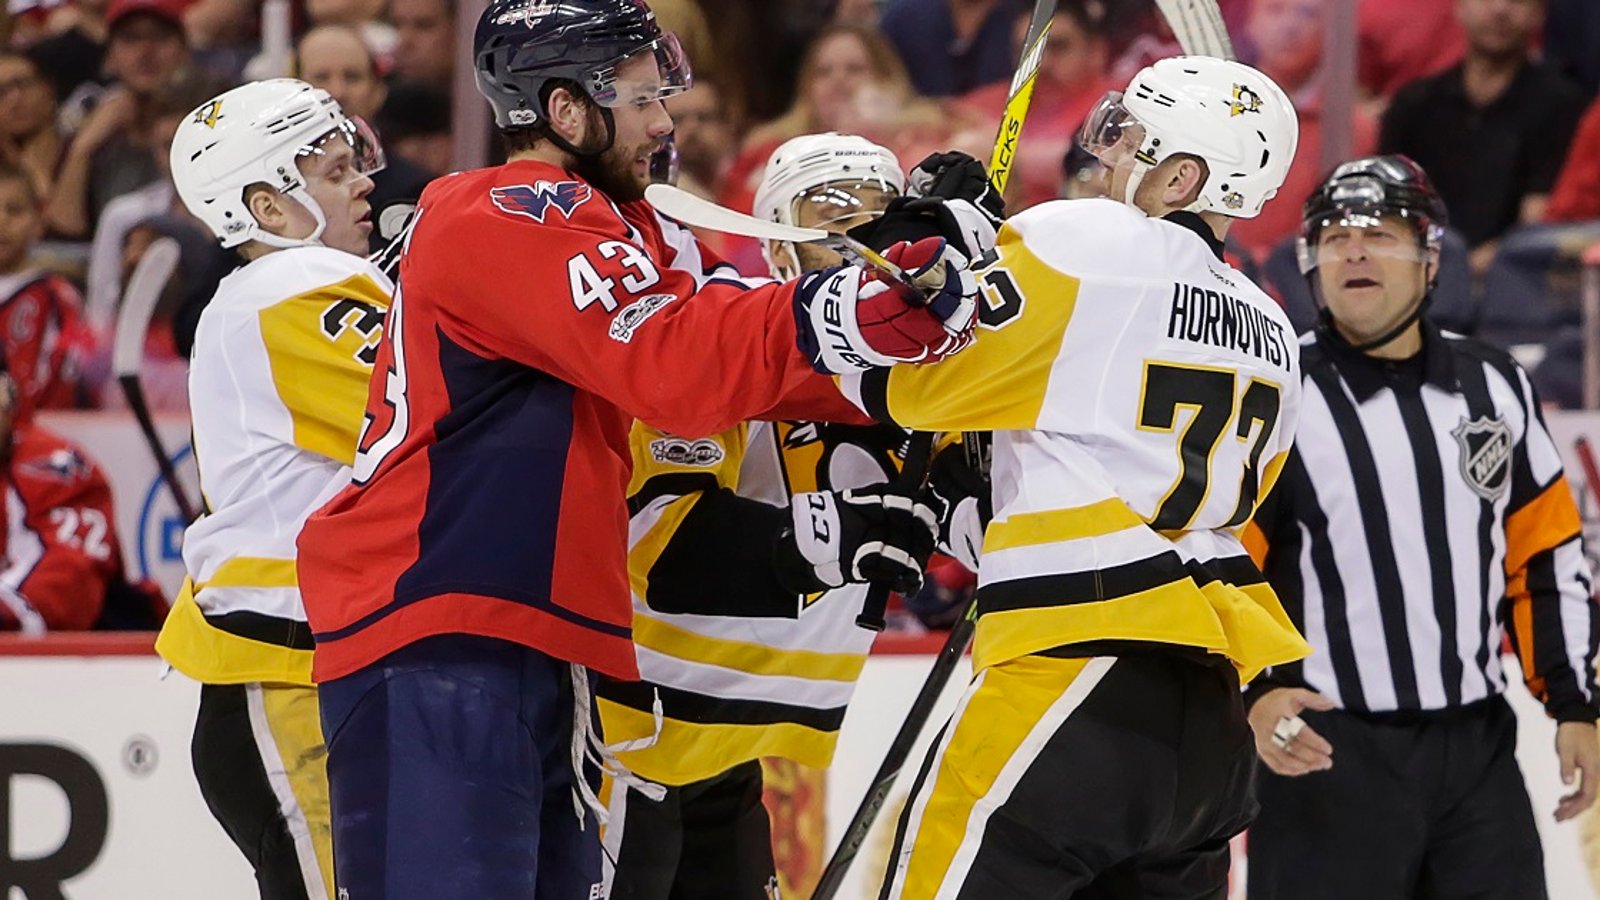 A closer look at the hit that could lead to Tom Wilson's suspension.